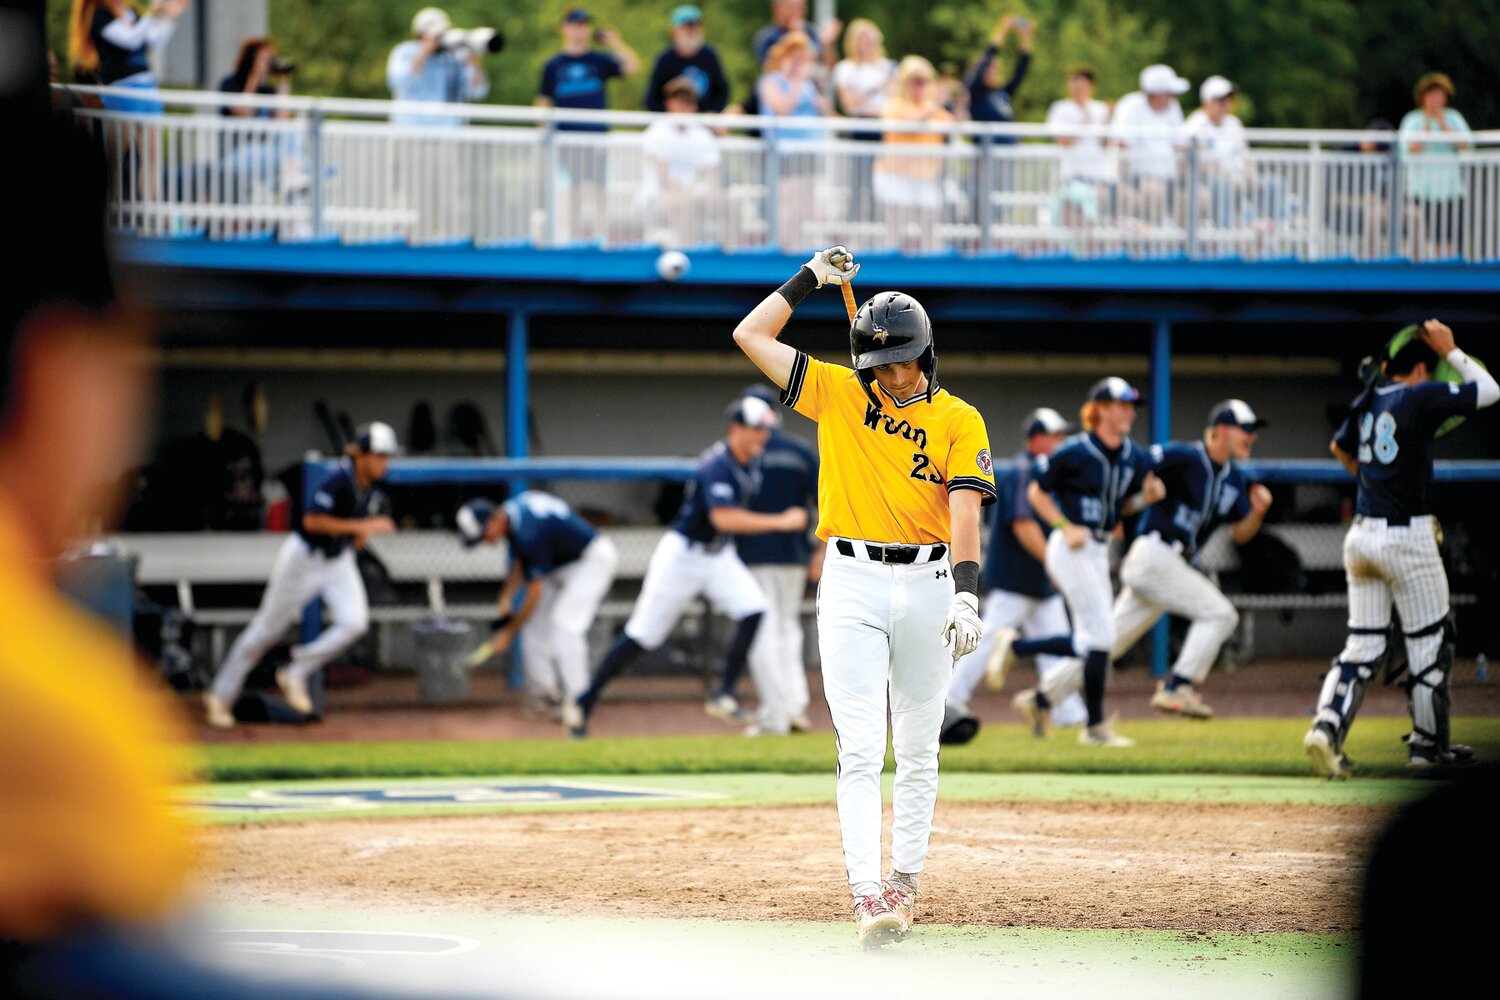 Archbishop Wood’s Brian Klumpp walks off the field after striking out to end the game.